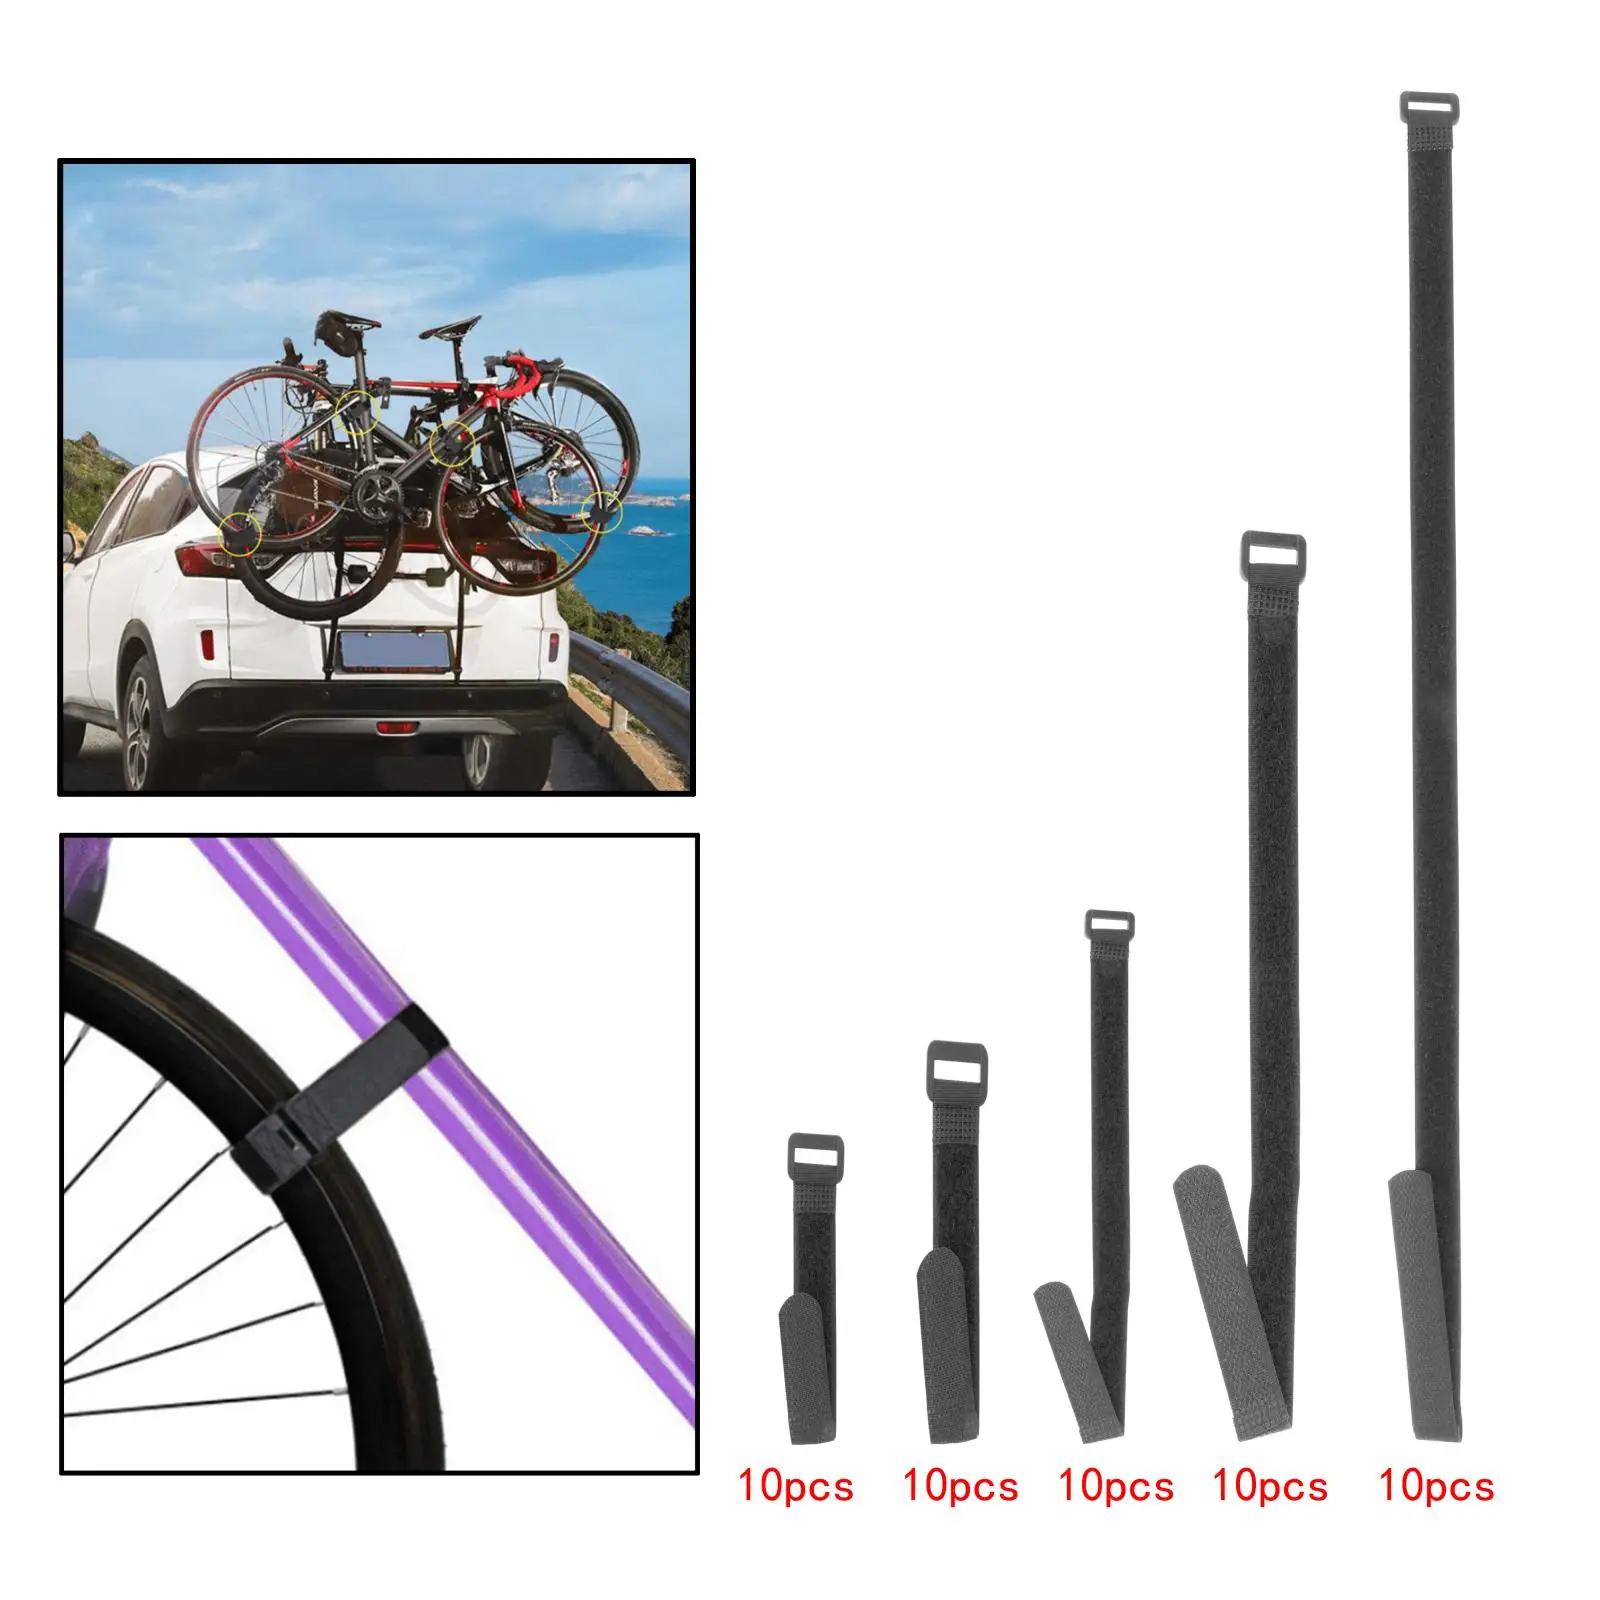 10 Pieces Bike Wheel Stabilizer Straps Fastening Stronger Bicycle Roof Rack Tie Down Belts